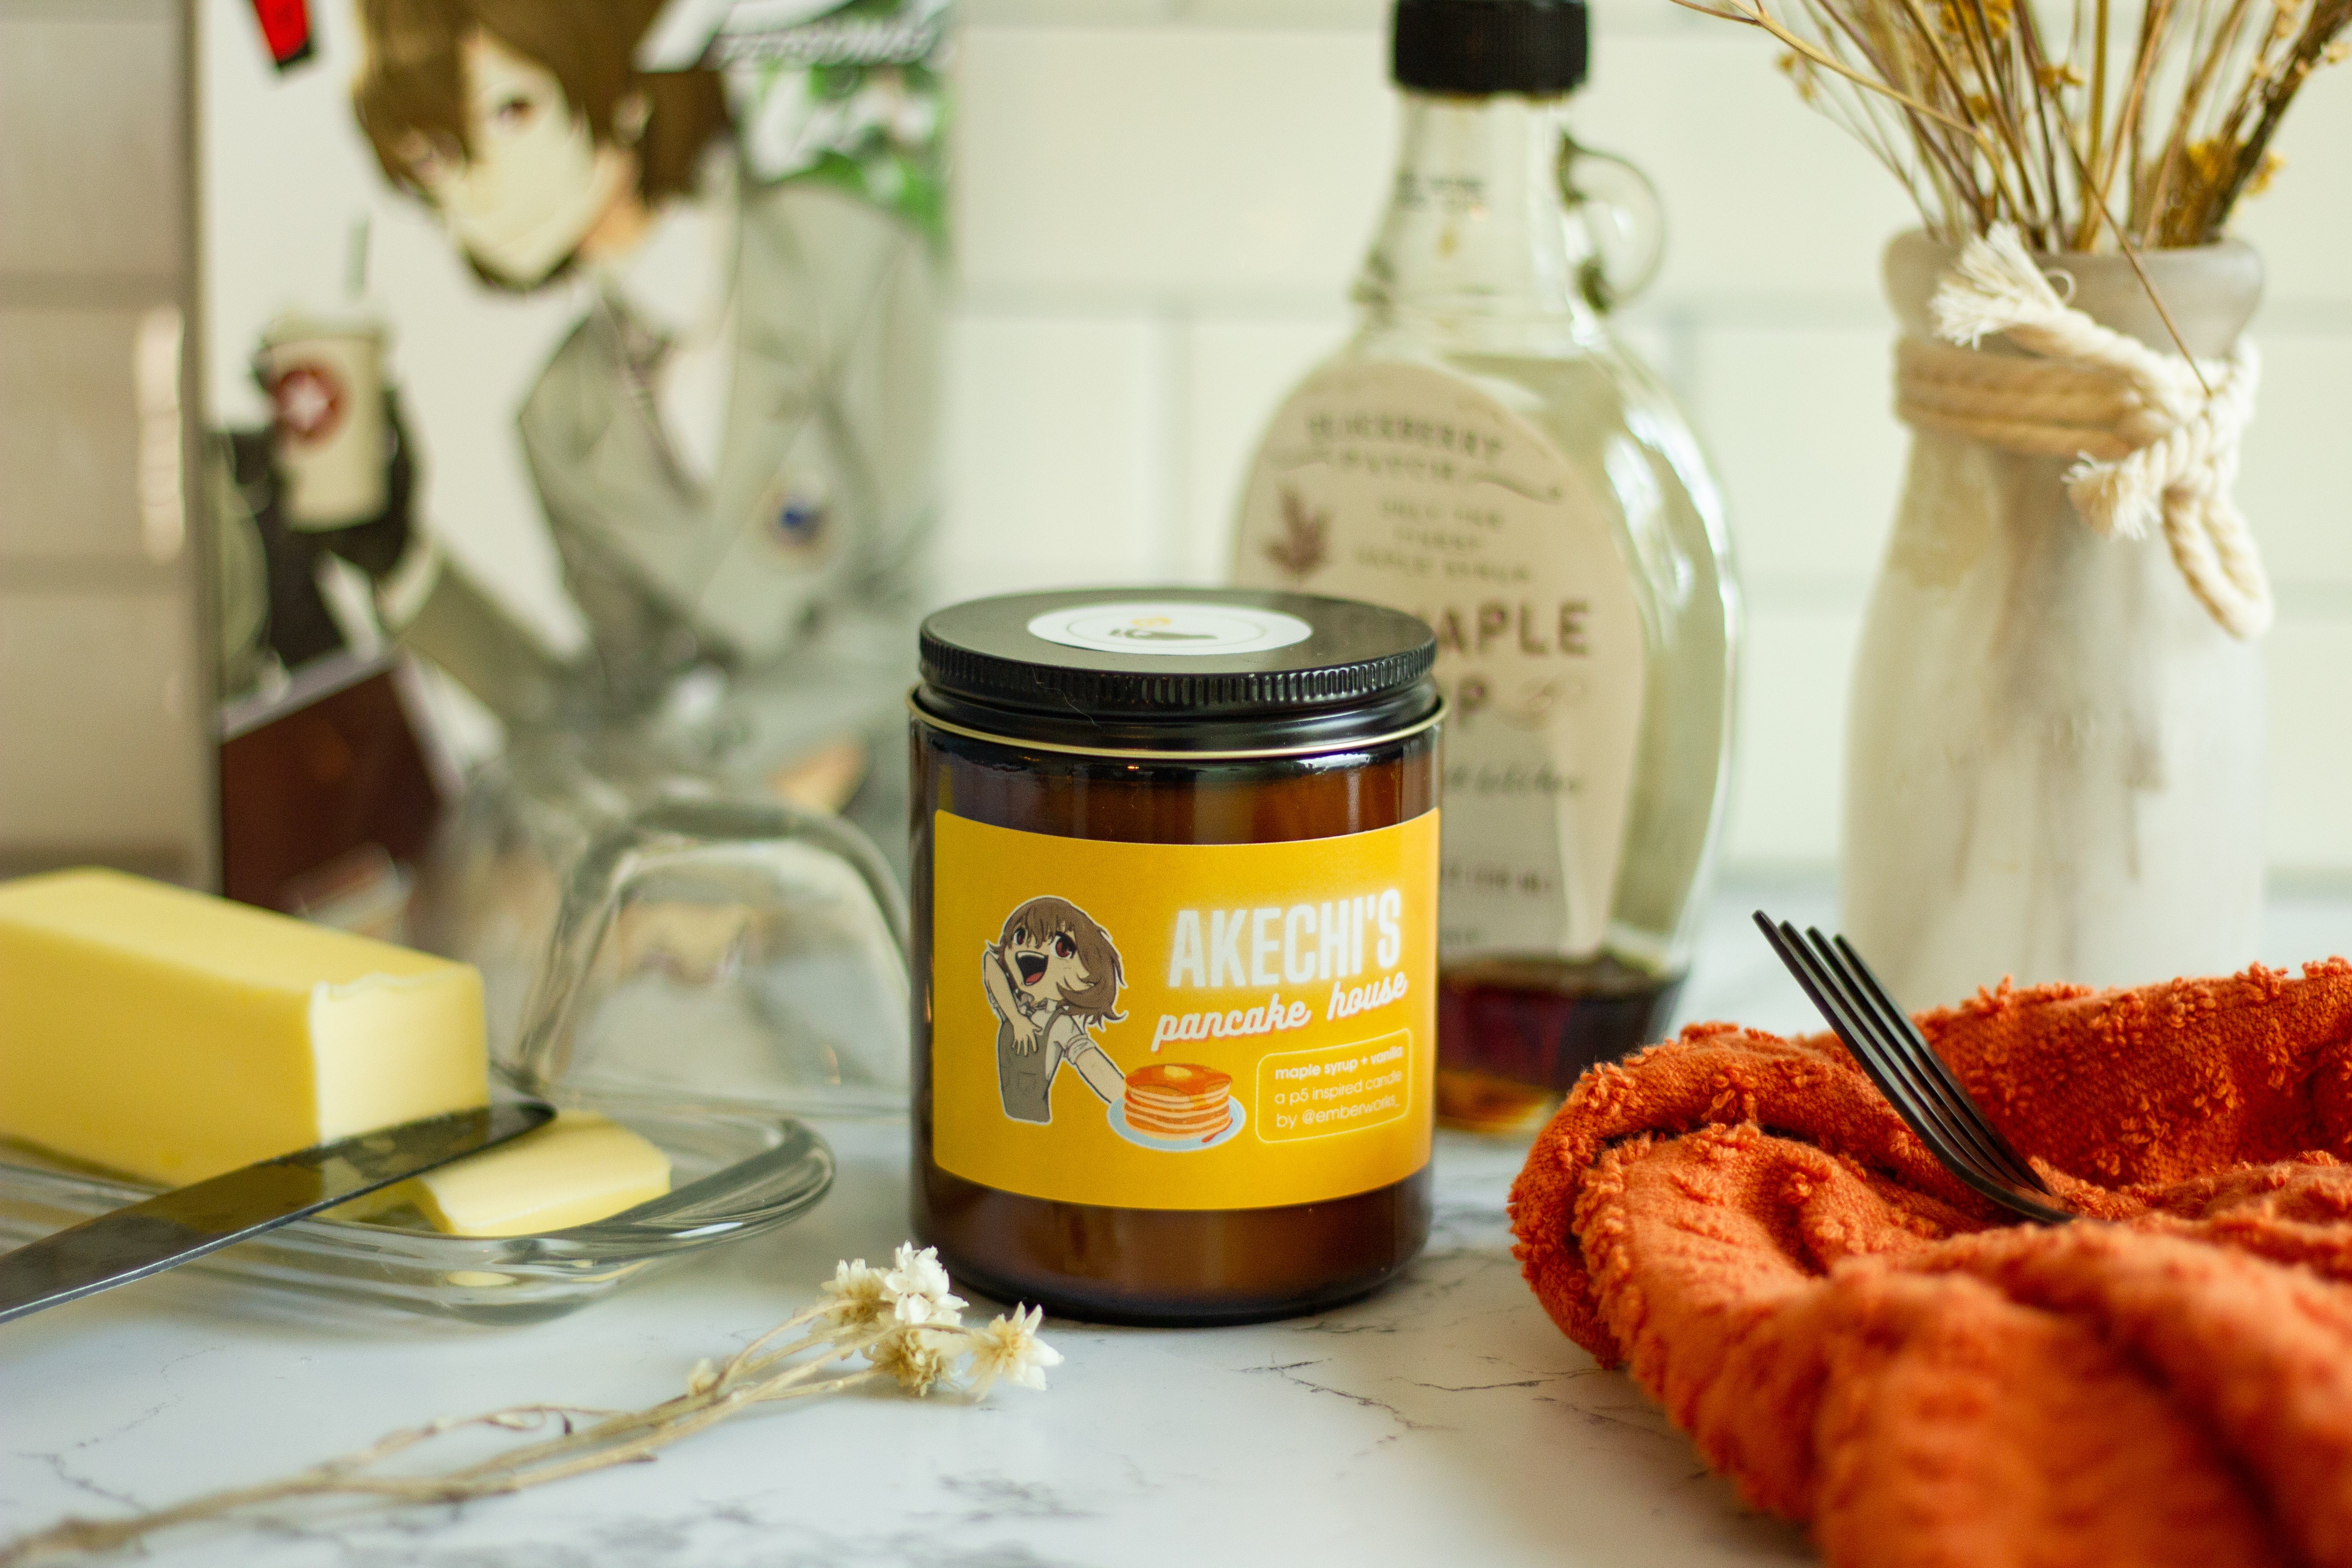 Akechi's Pancake House - A Persona 5 Inspired Candle